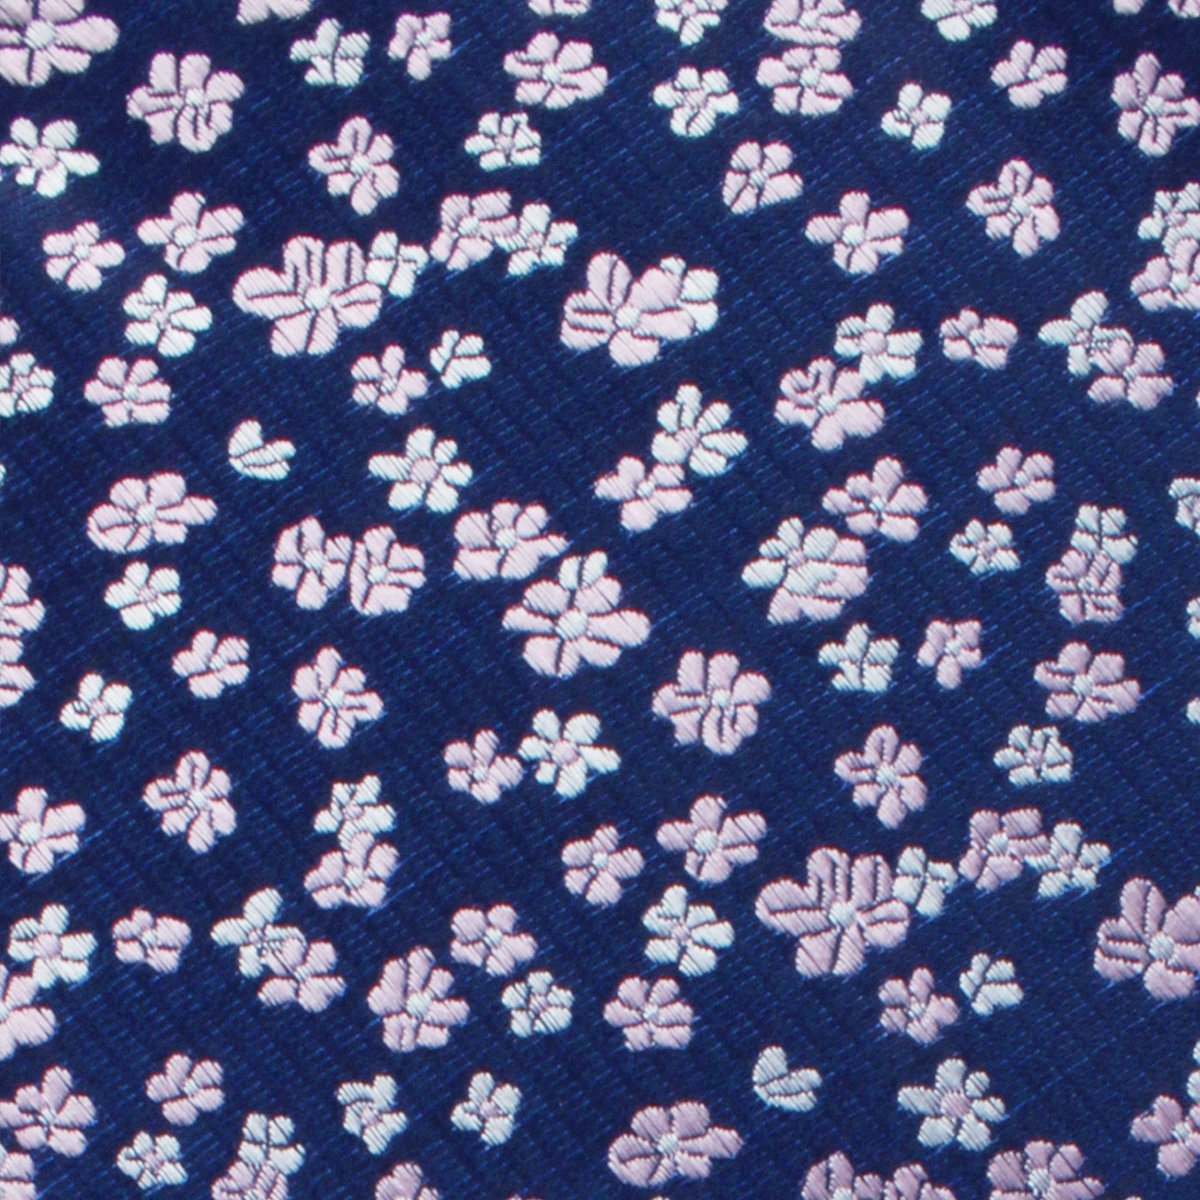 Aster Amellus Lilac Floral Fabric Swatch